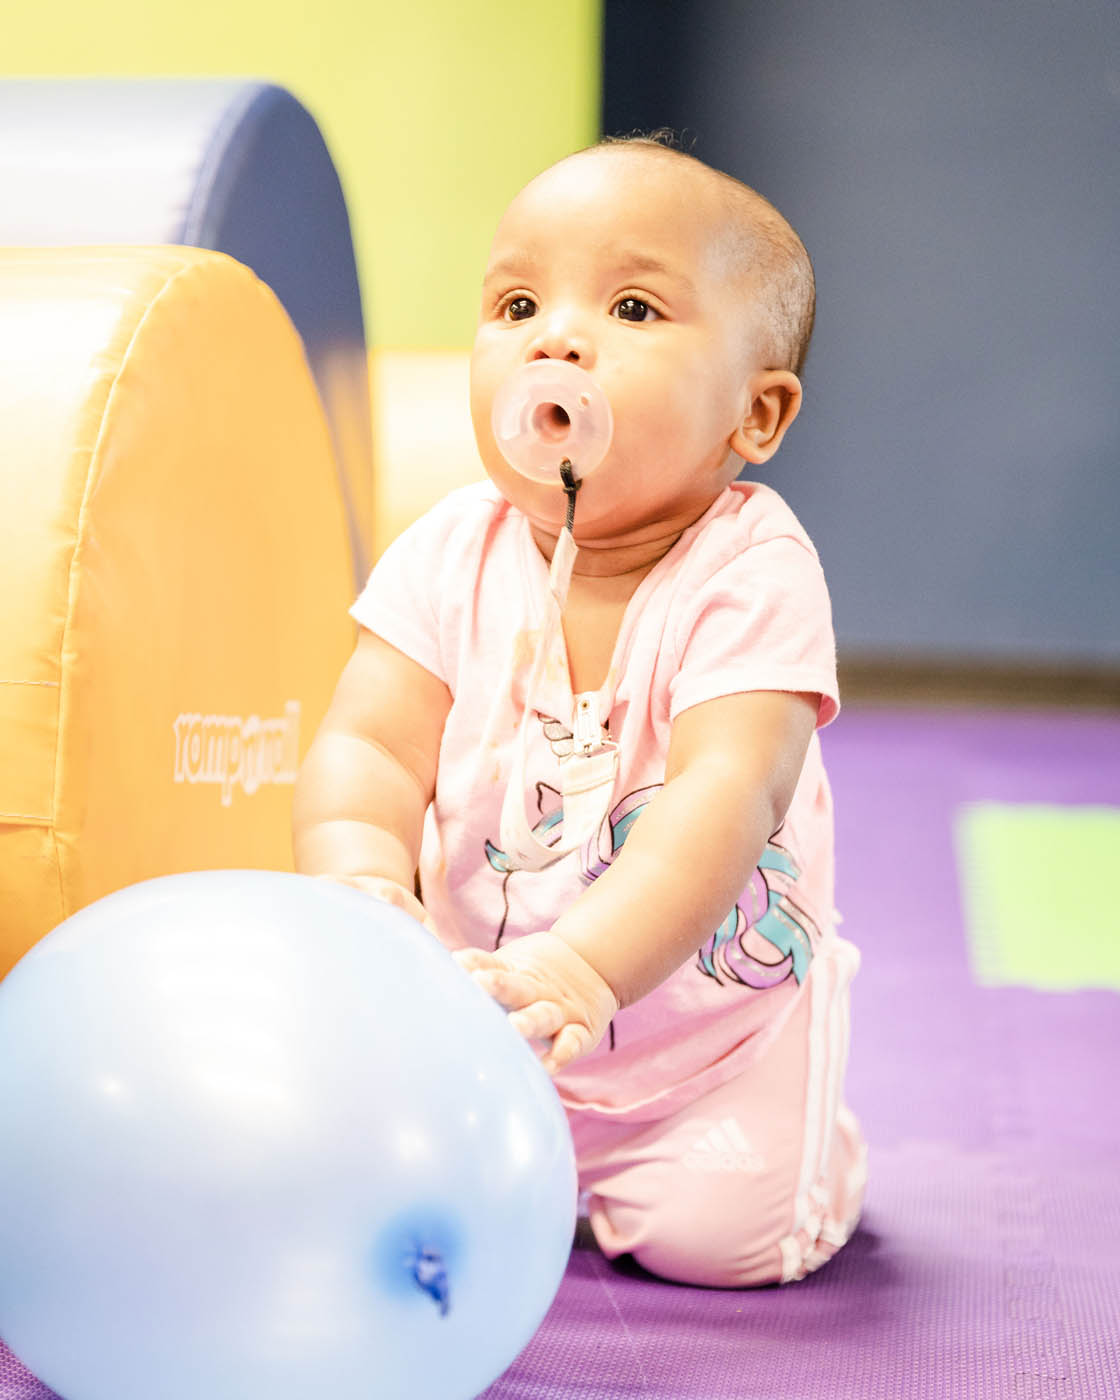 A baby in a gym class working on basic motor skills and enjoying playing with a blue ball - Romp n' Roll in Glen Allen.